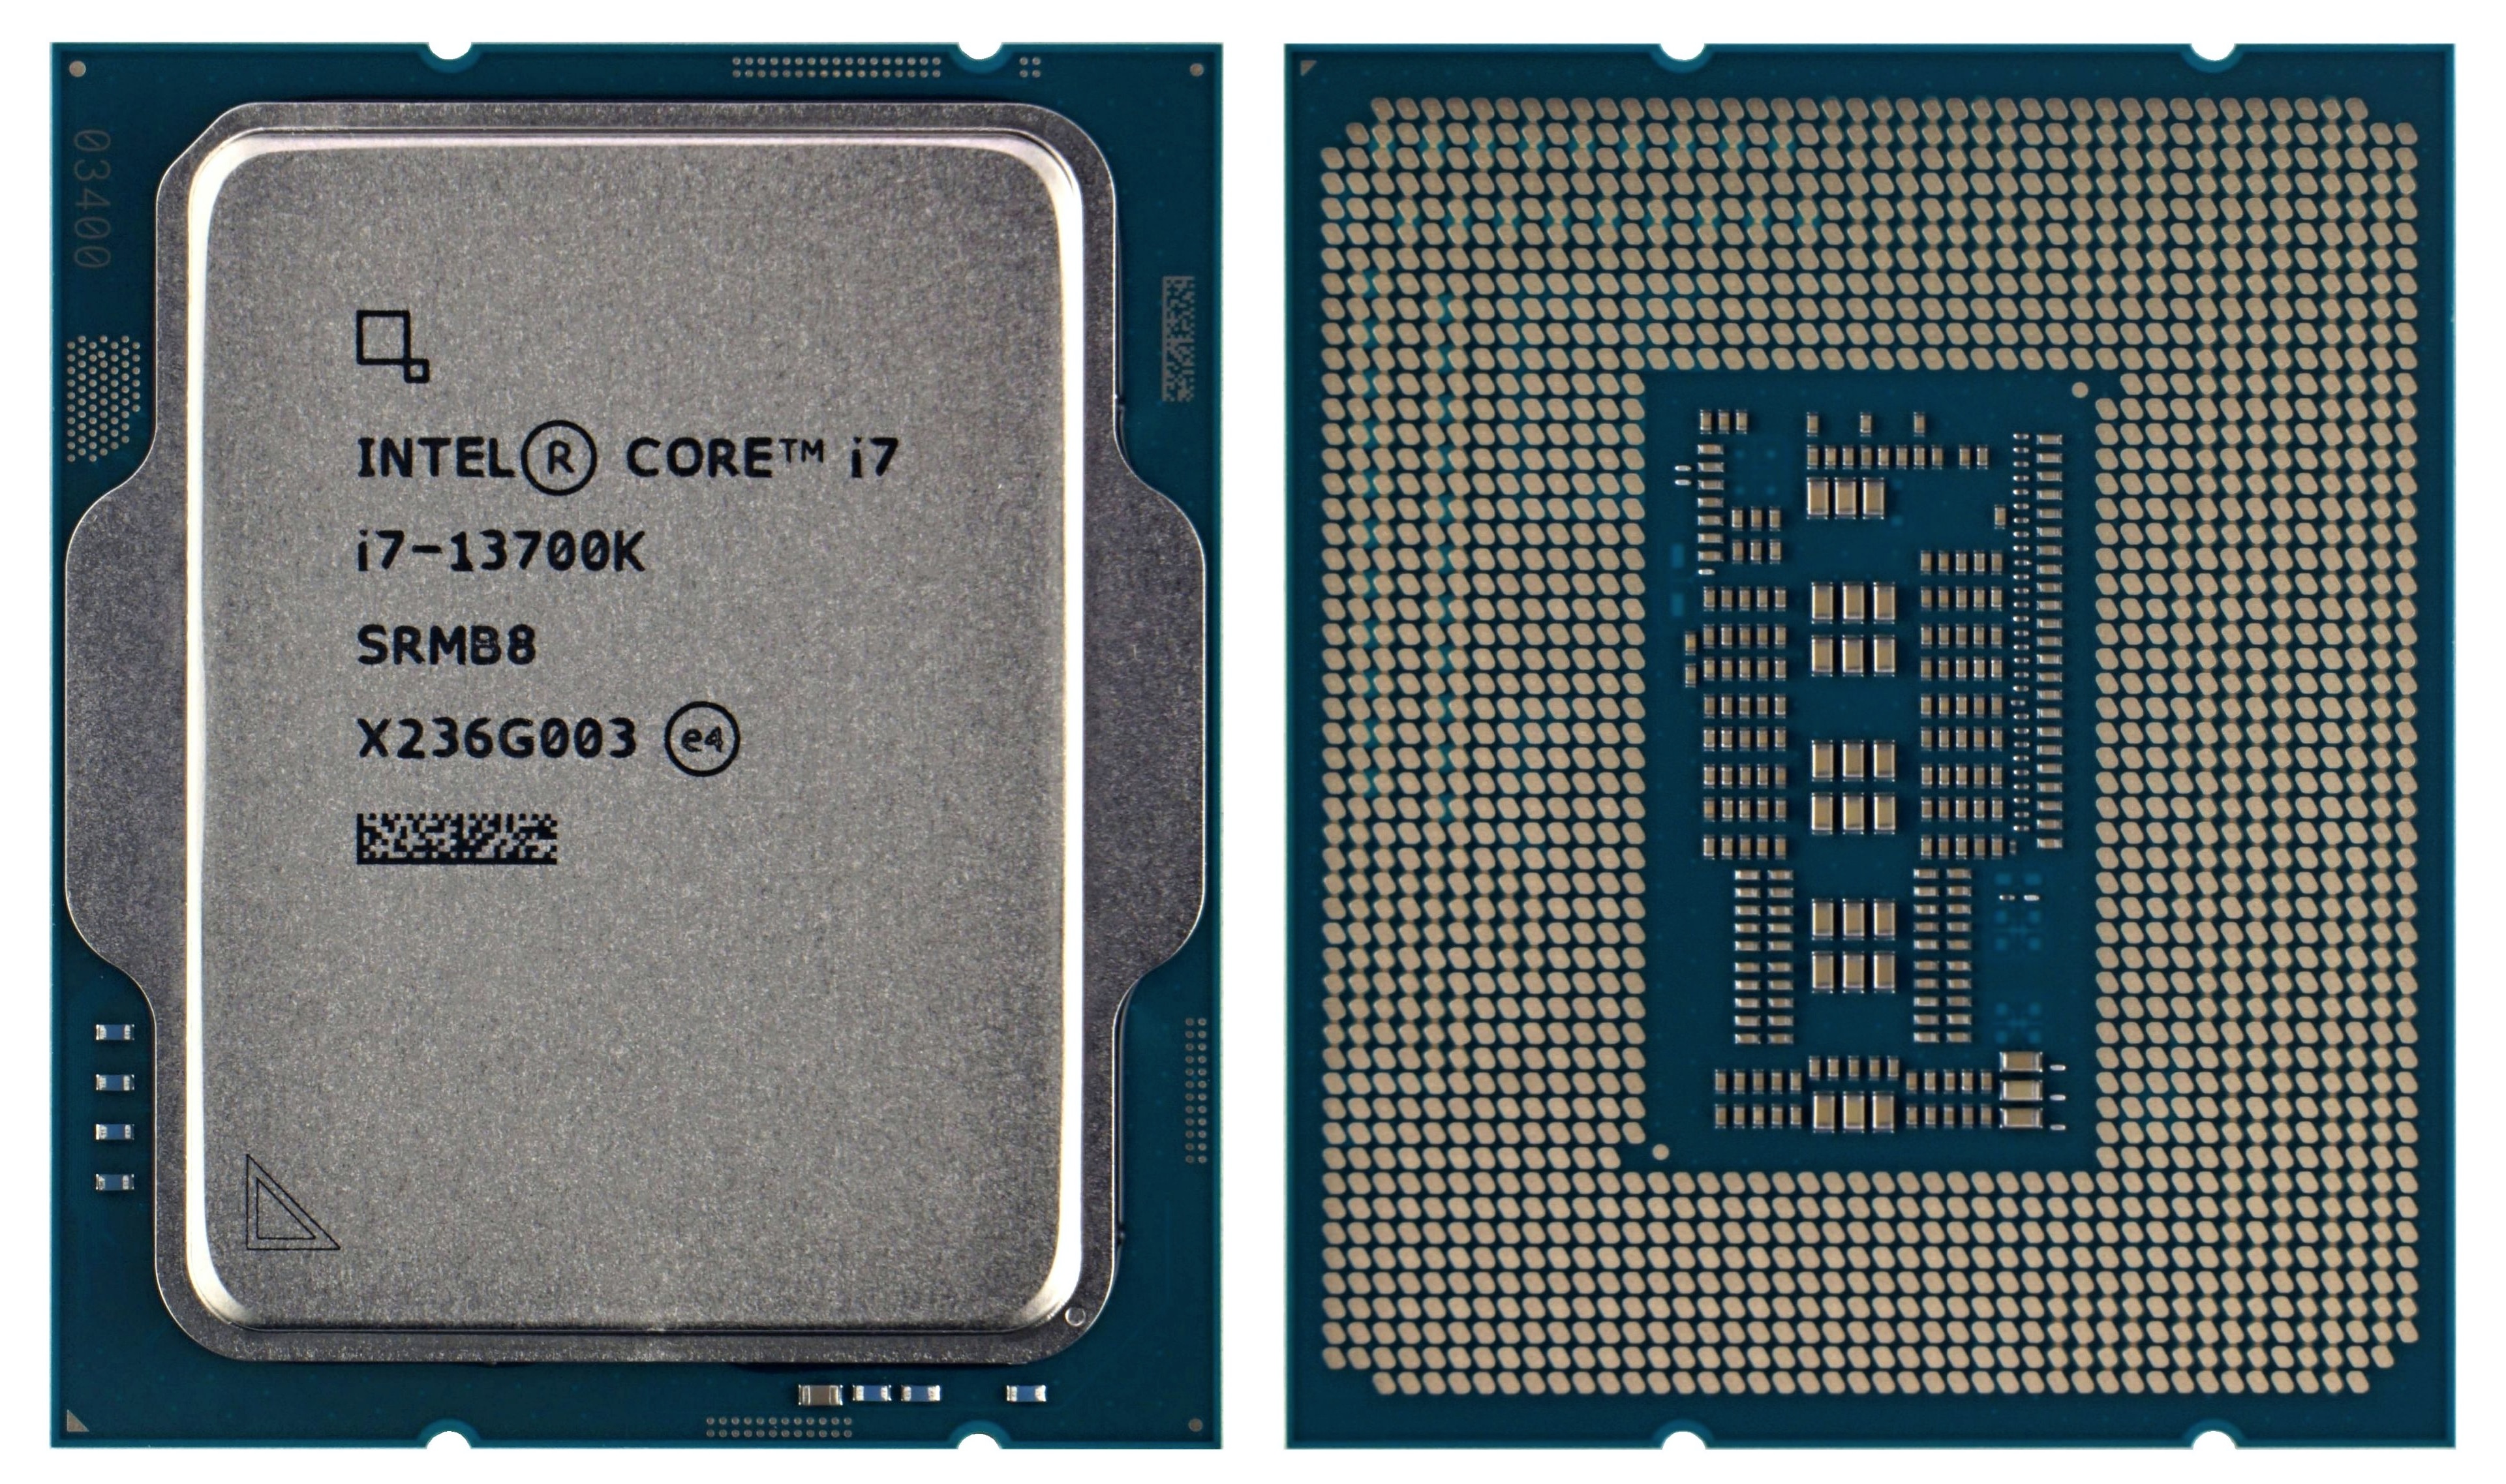 Intel Core i7-13700K Review - Great at Gaming and Applications